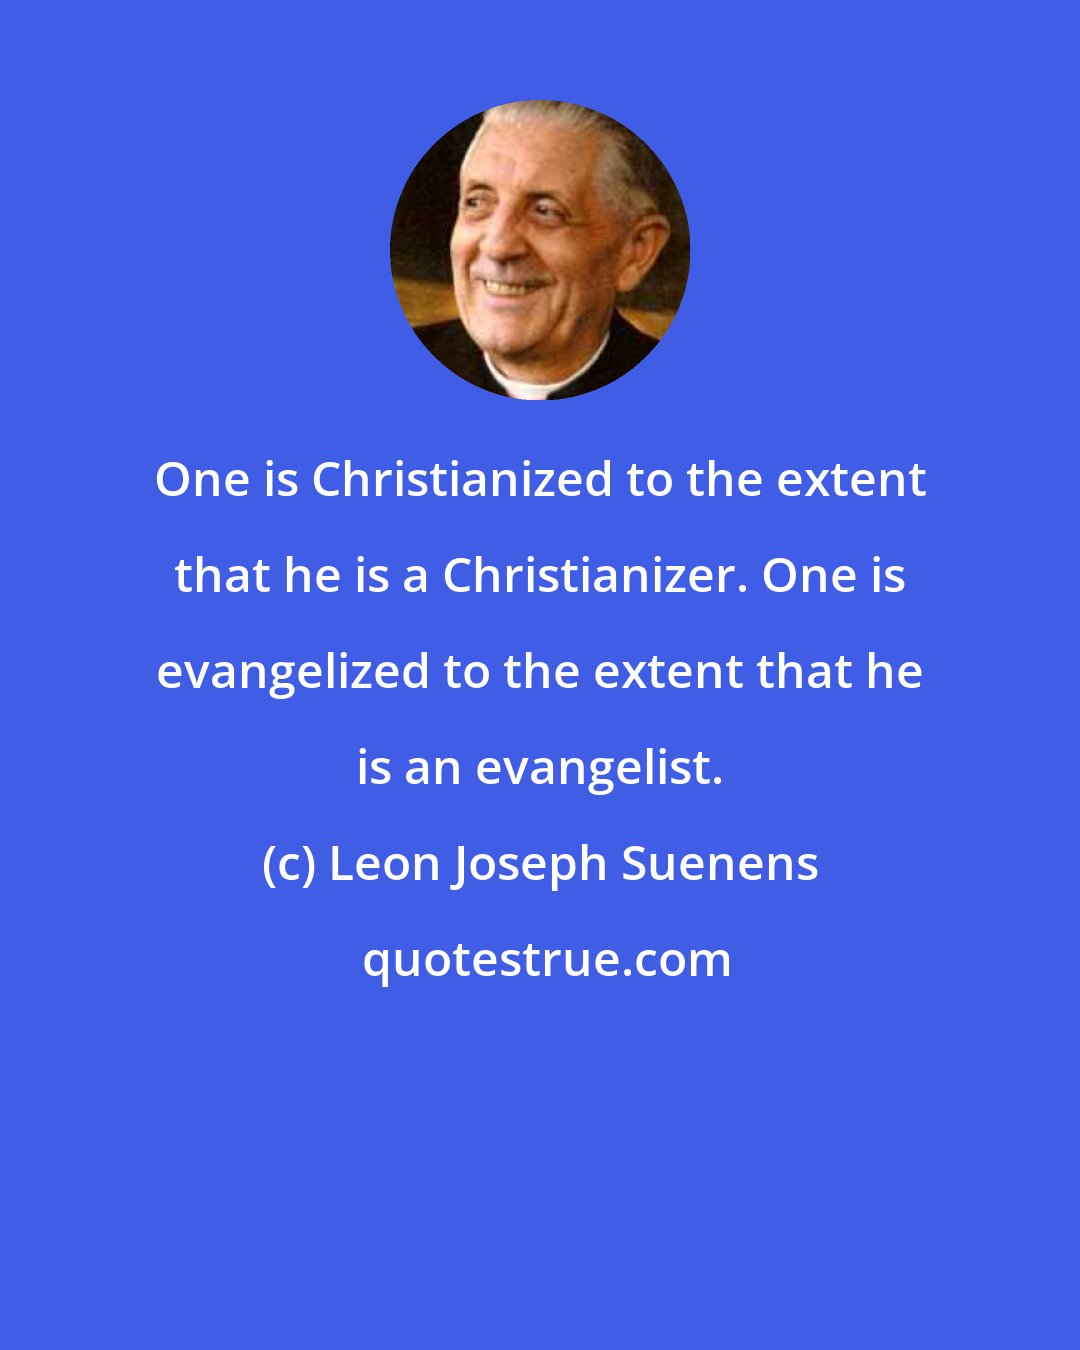 Leon Joseph Suenens: One is Christianized to the extent that he is a Christianizer. One is evangelized to the extent that he is an evangelist.